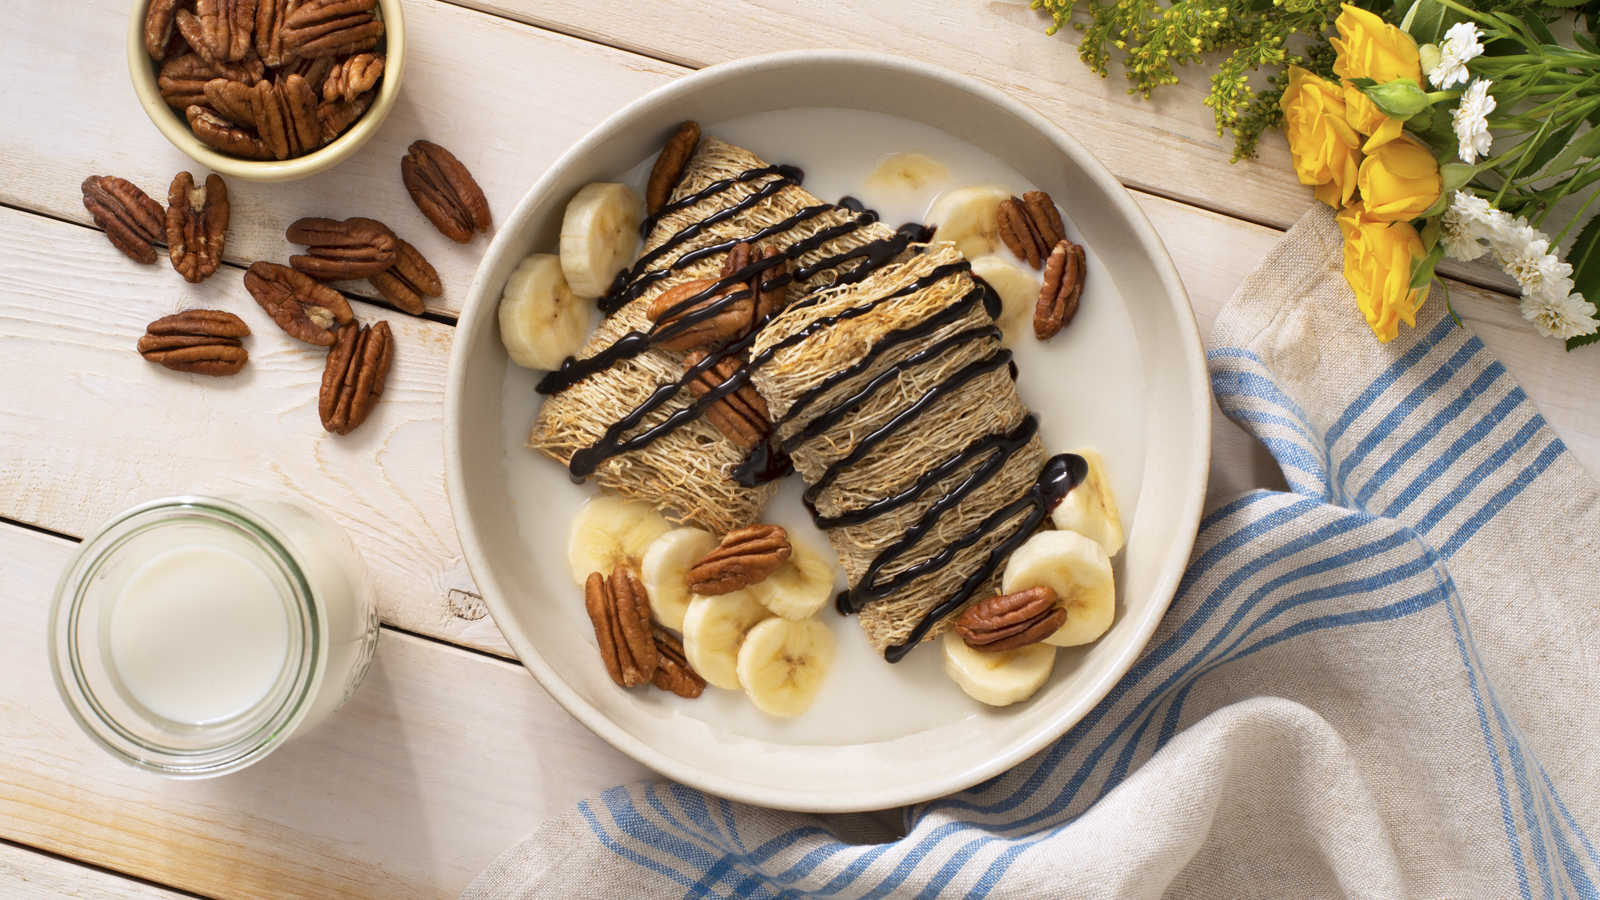 Shredded Wheat Go Bananas breakfast bowl with pecans and banana slices on top.